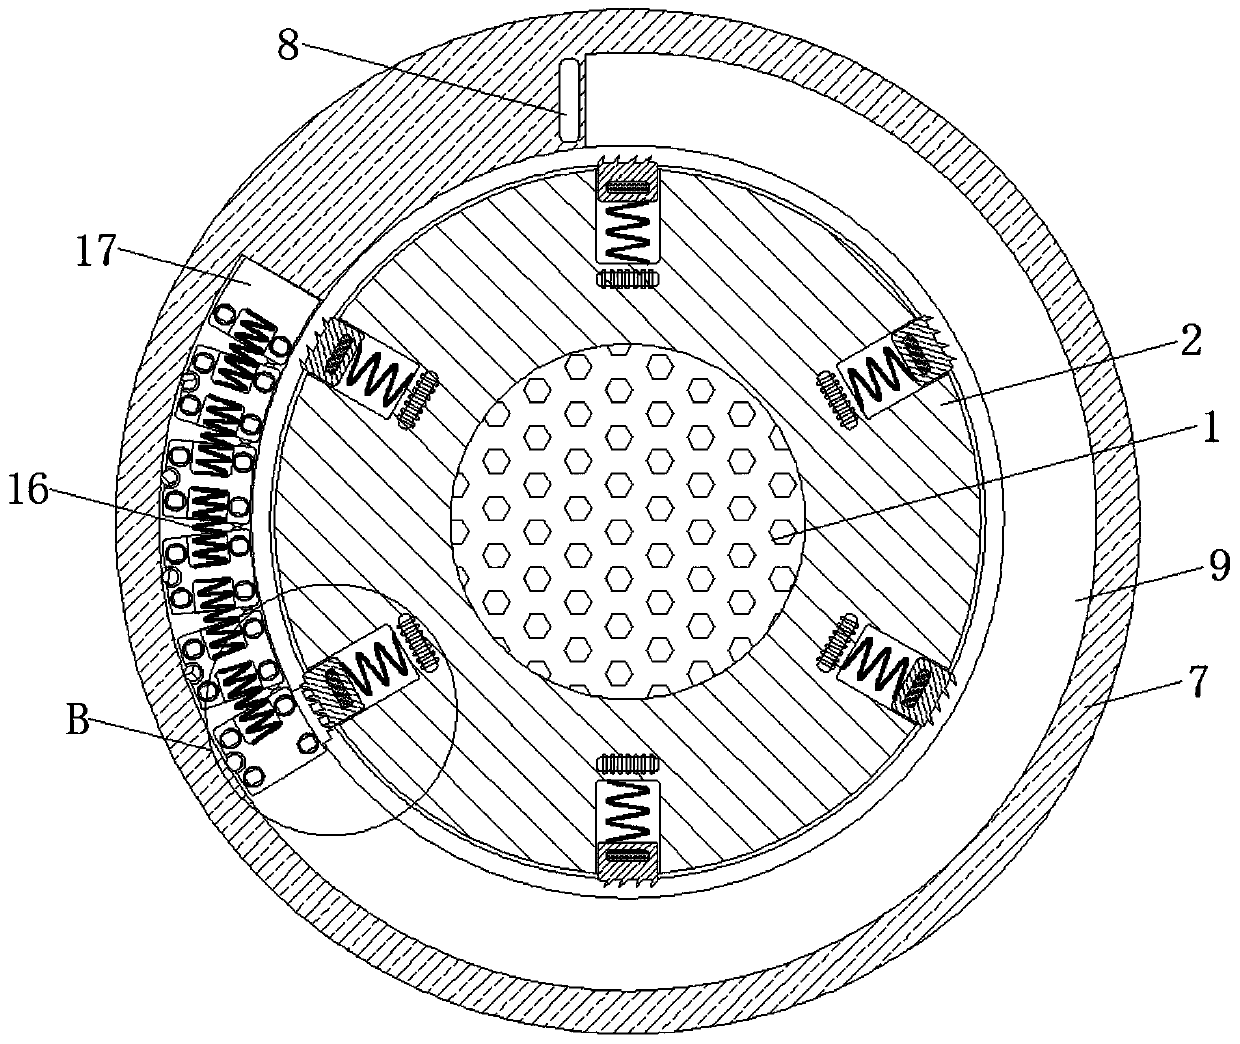 Centrifugal force change-based device for preventing stirring device from stalling